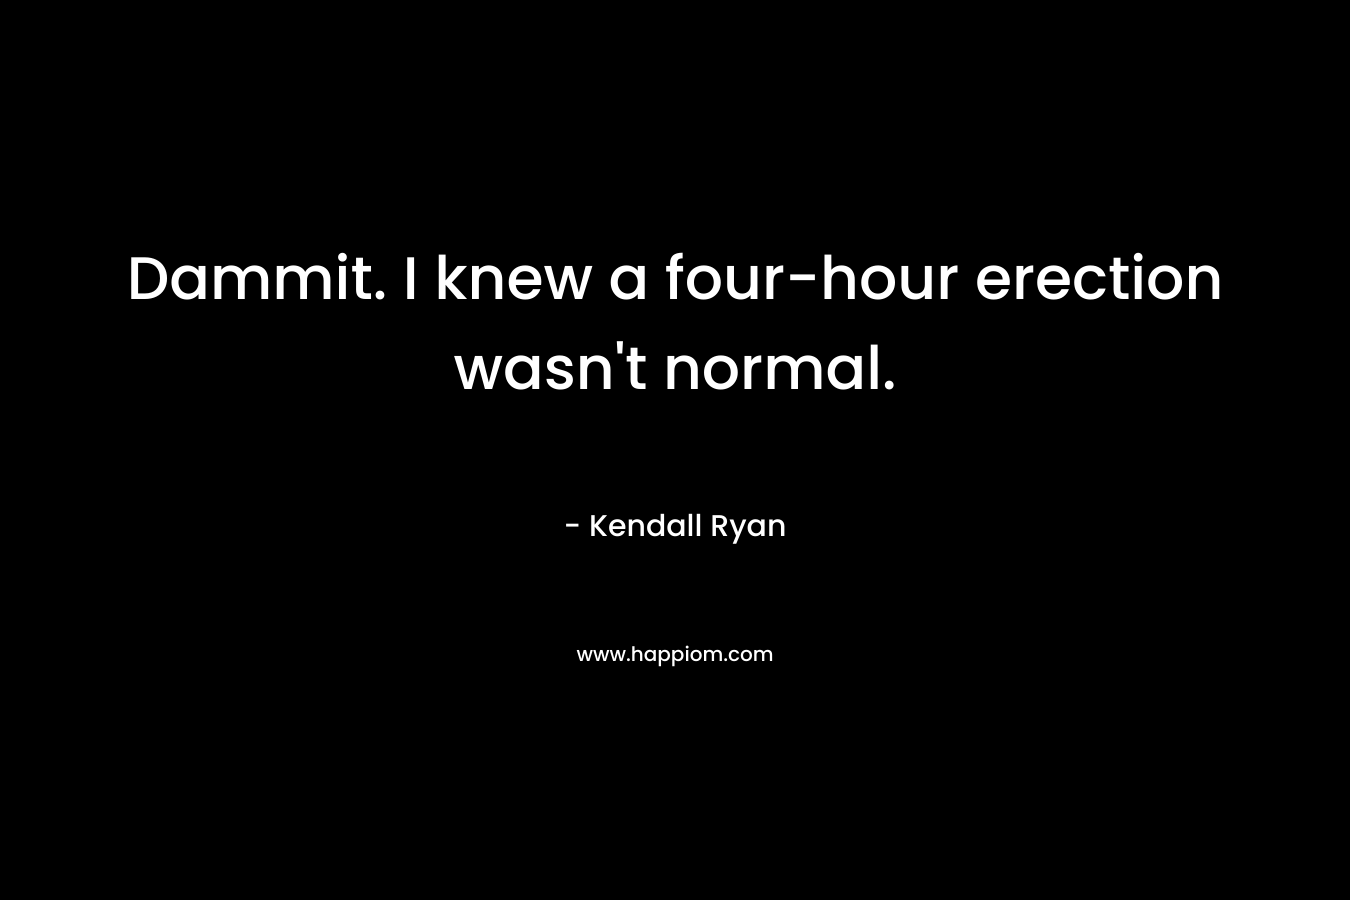 Dammit. I knew a four-hour erection wasn’t normal. – Kendall Ryan